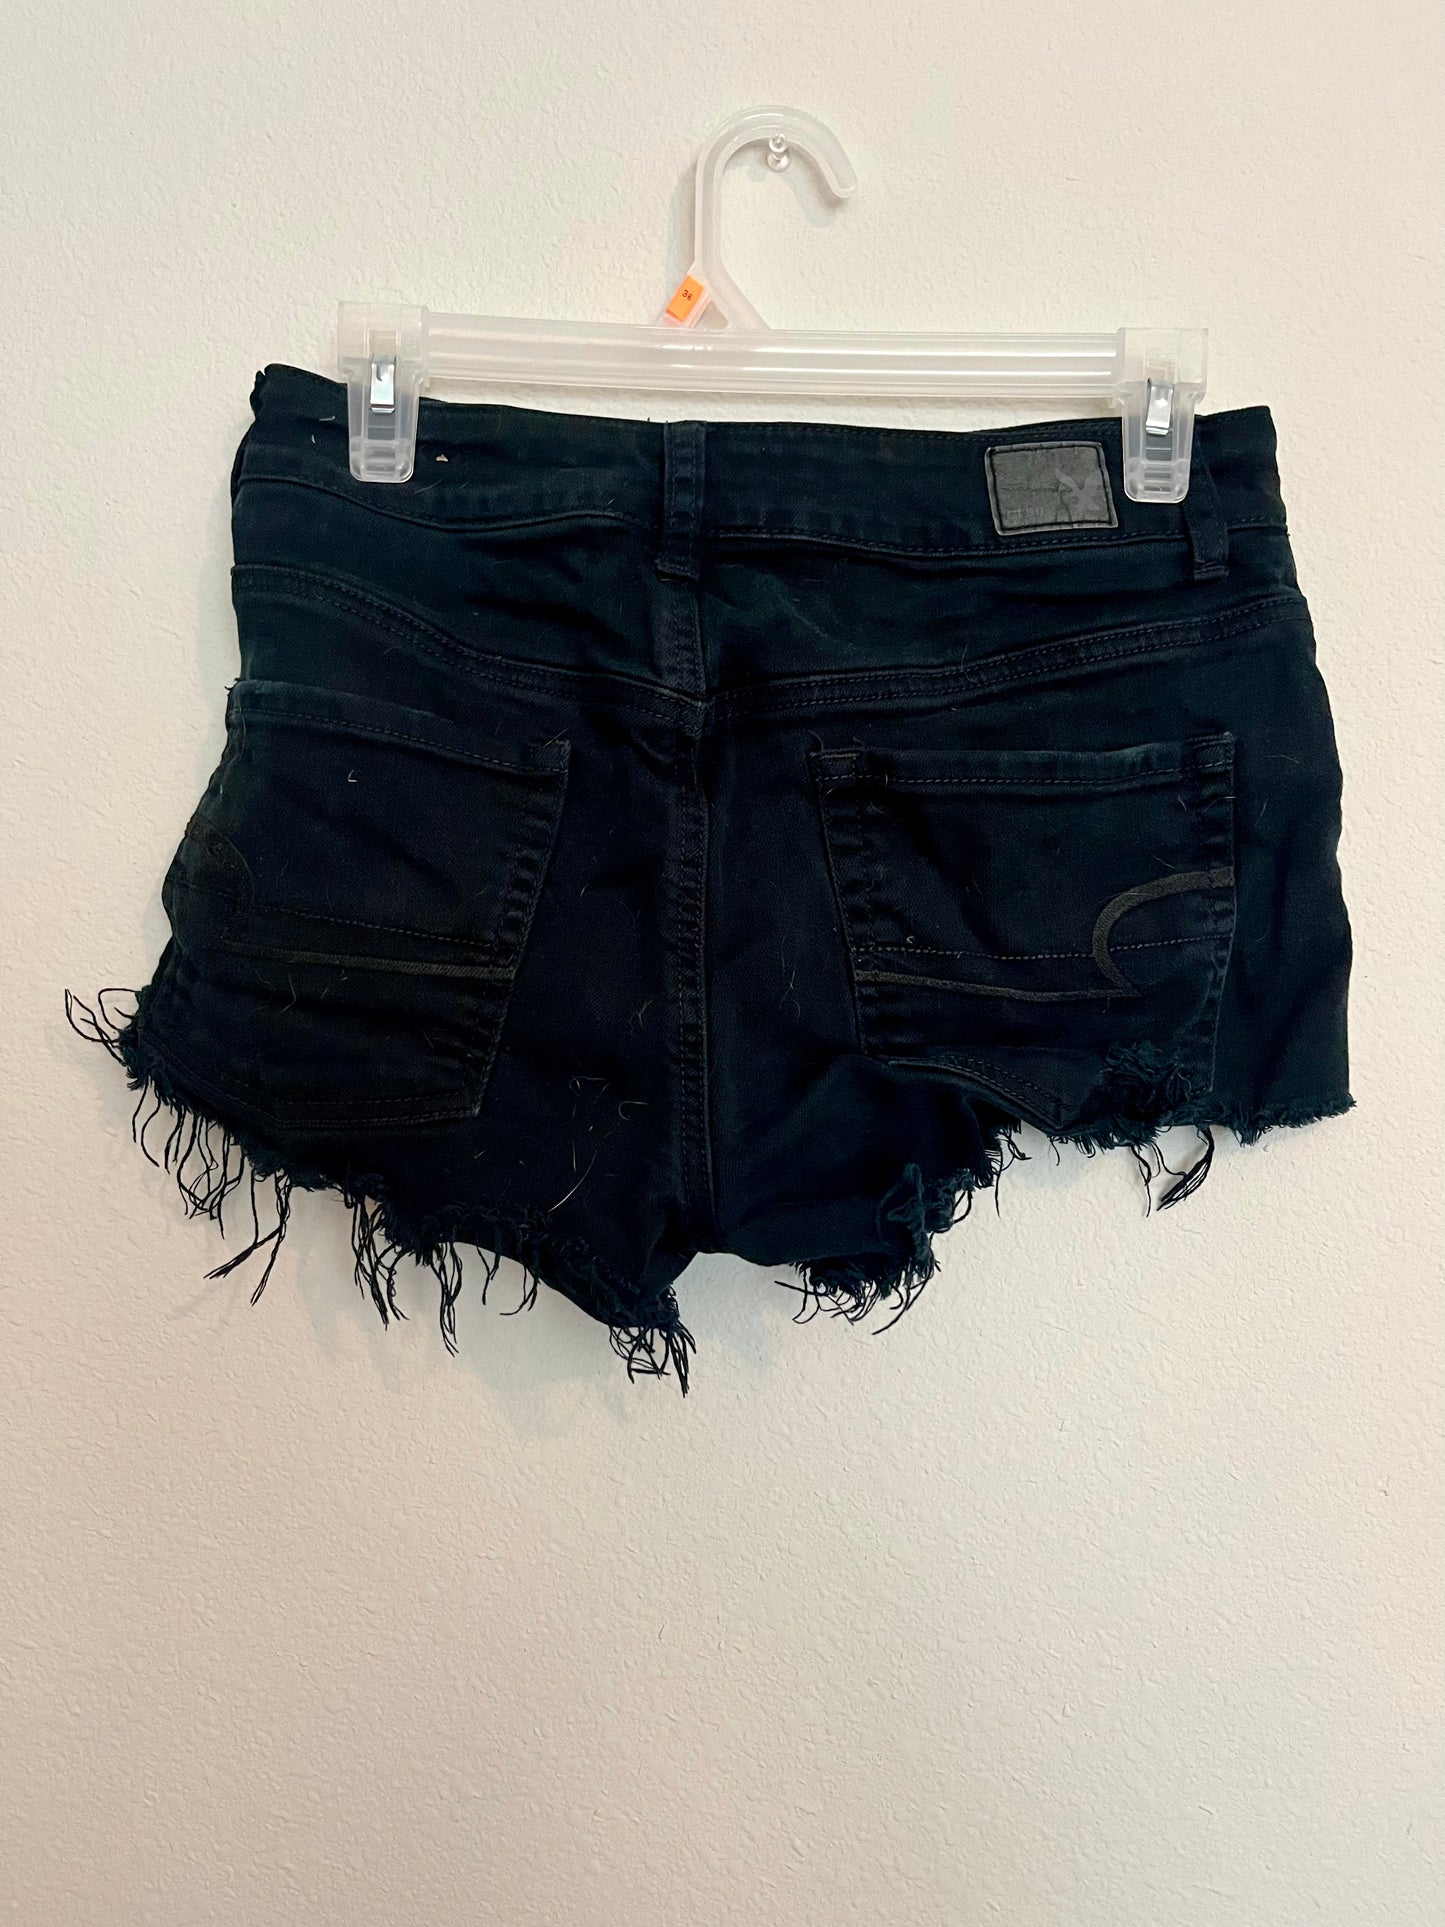 American Eagle Distressed Festival Shorts, Size 6 - Tales from the Tangle